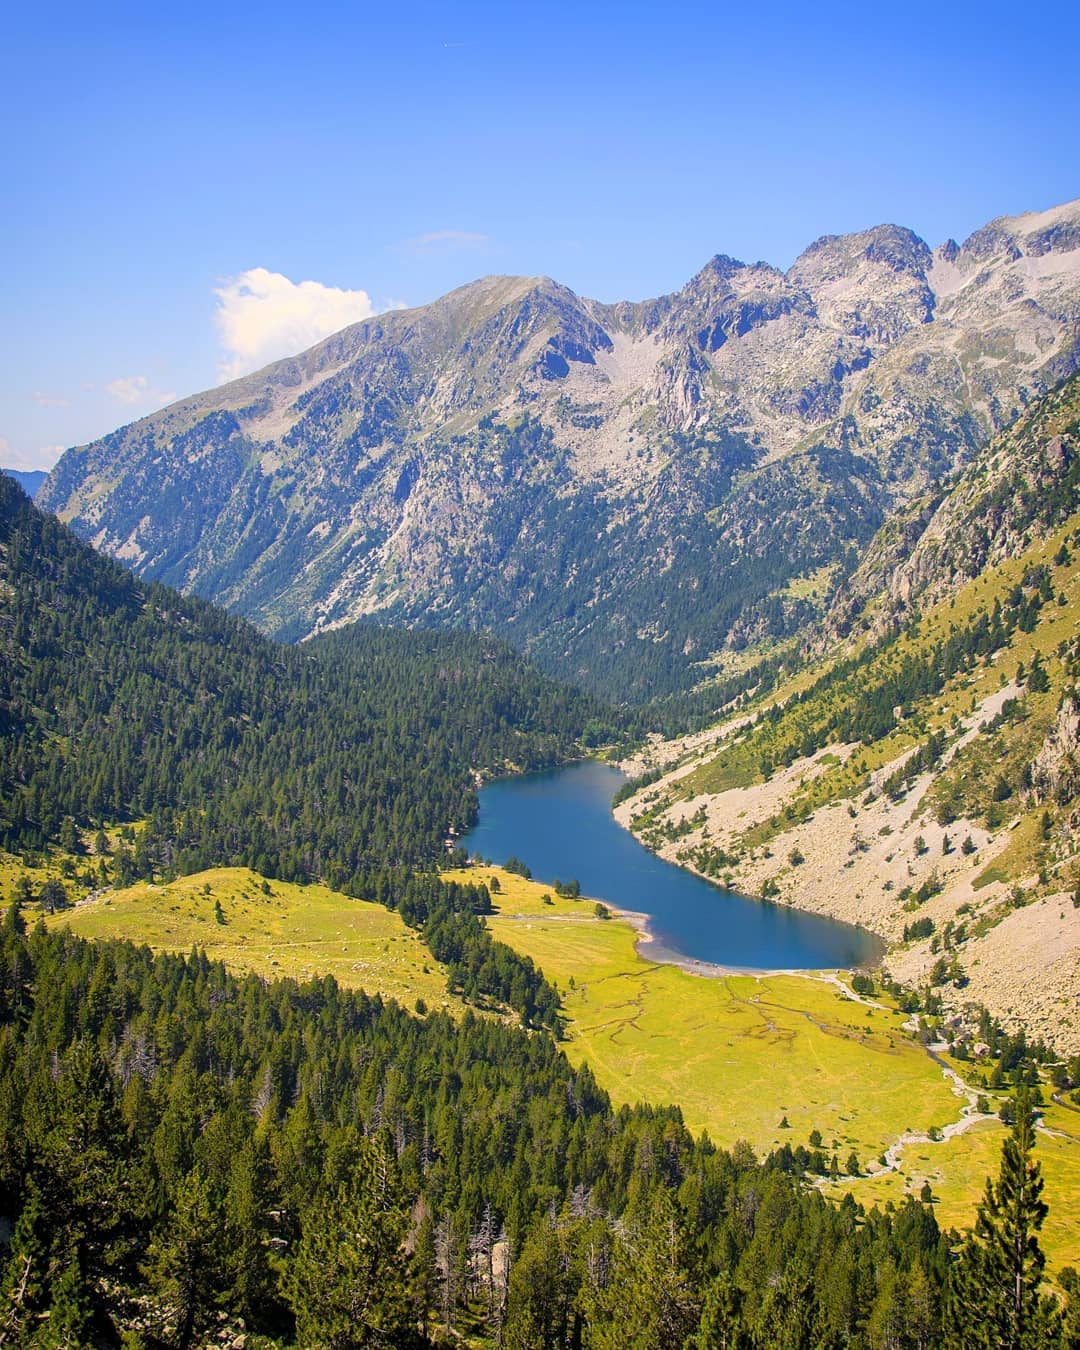 This view from Aigüestortes and Lake Sant Maurici National Park in the @valldeboi area of the Catalan Pyrenees has a bit of everything we love: mountains, meadows, forests and lakes. ⠀
⠀
We picked a perfect day for hiking across the stunning park during our mystery trip to the region with @visitpirineus, @catalunyaexperience and @outdooradventour.⠀
-⠀⠀
-⠀⠀
-⠀⠀
-⠀⠀
-⠀⠀
-⠀⠀
#catalunyaexperience #visitpirineus #valldeboi #onelspirineustoquenelcel #dondelospirineostocanelcielo #aiguestortes #aigüestortes #pnaiguestortes #parquenacionalaigüestortes #parcnacionalaigüestortes #aiguestortesnationalpark #aigüestortesiestanydesantmaurici #catalunya #catalonia #viewfromthetop #liveoutdoors #neverstopexploring #keepitwild #thegreatoutdoors #wellhiked #stayandwander #takeahike #hikingadventures #getoutstayout #lppathfinders